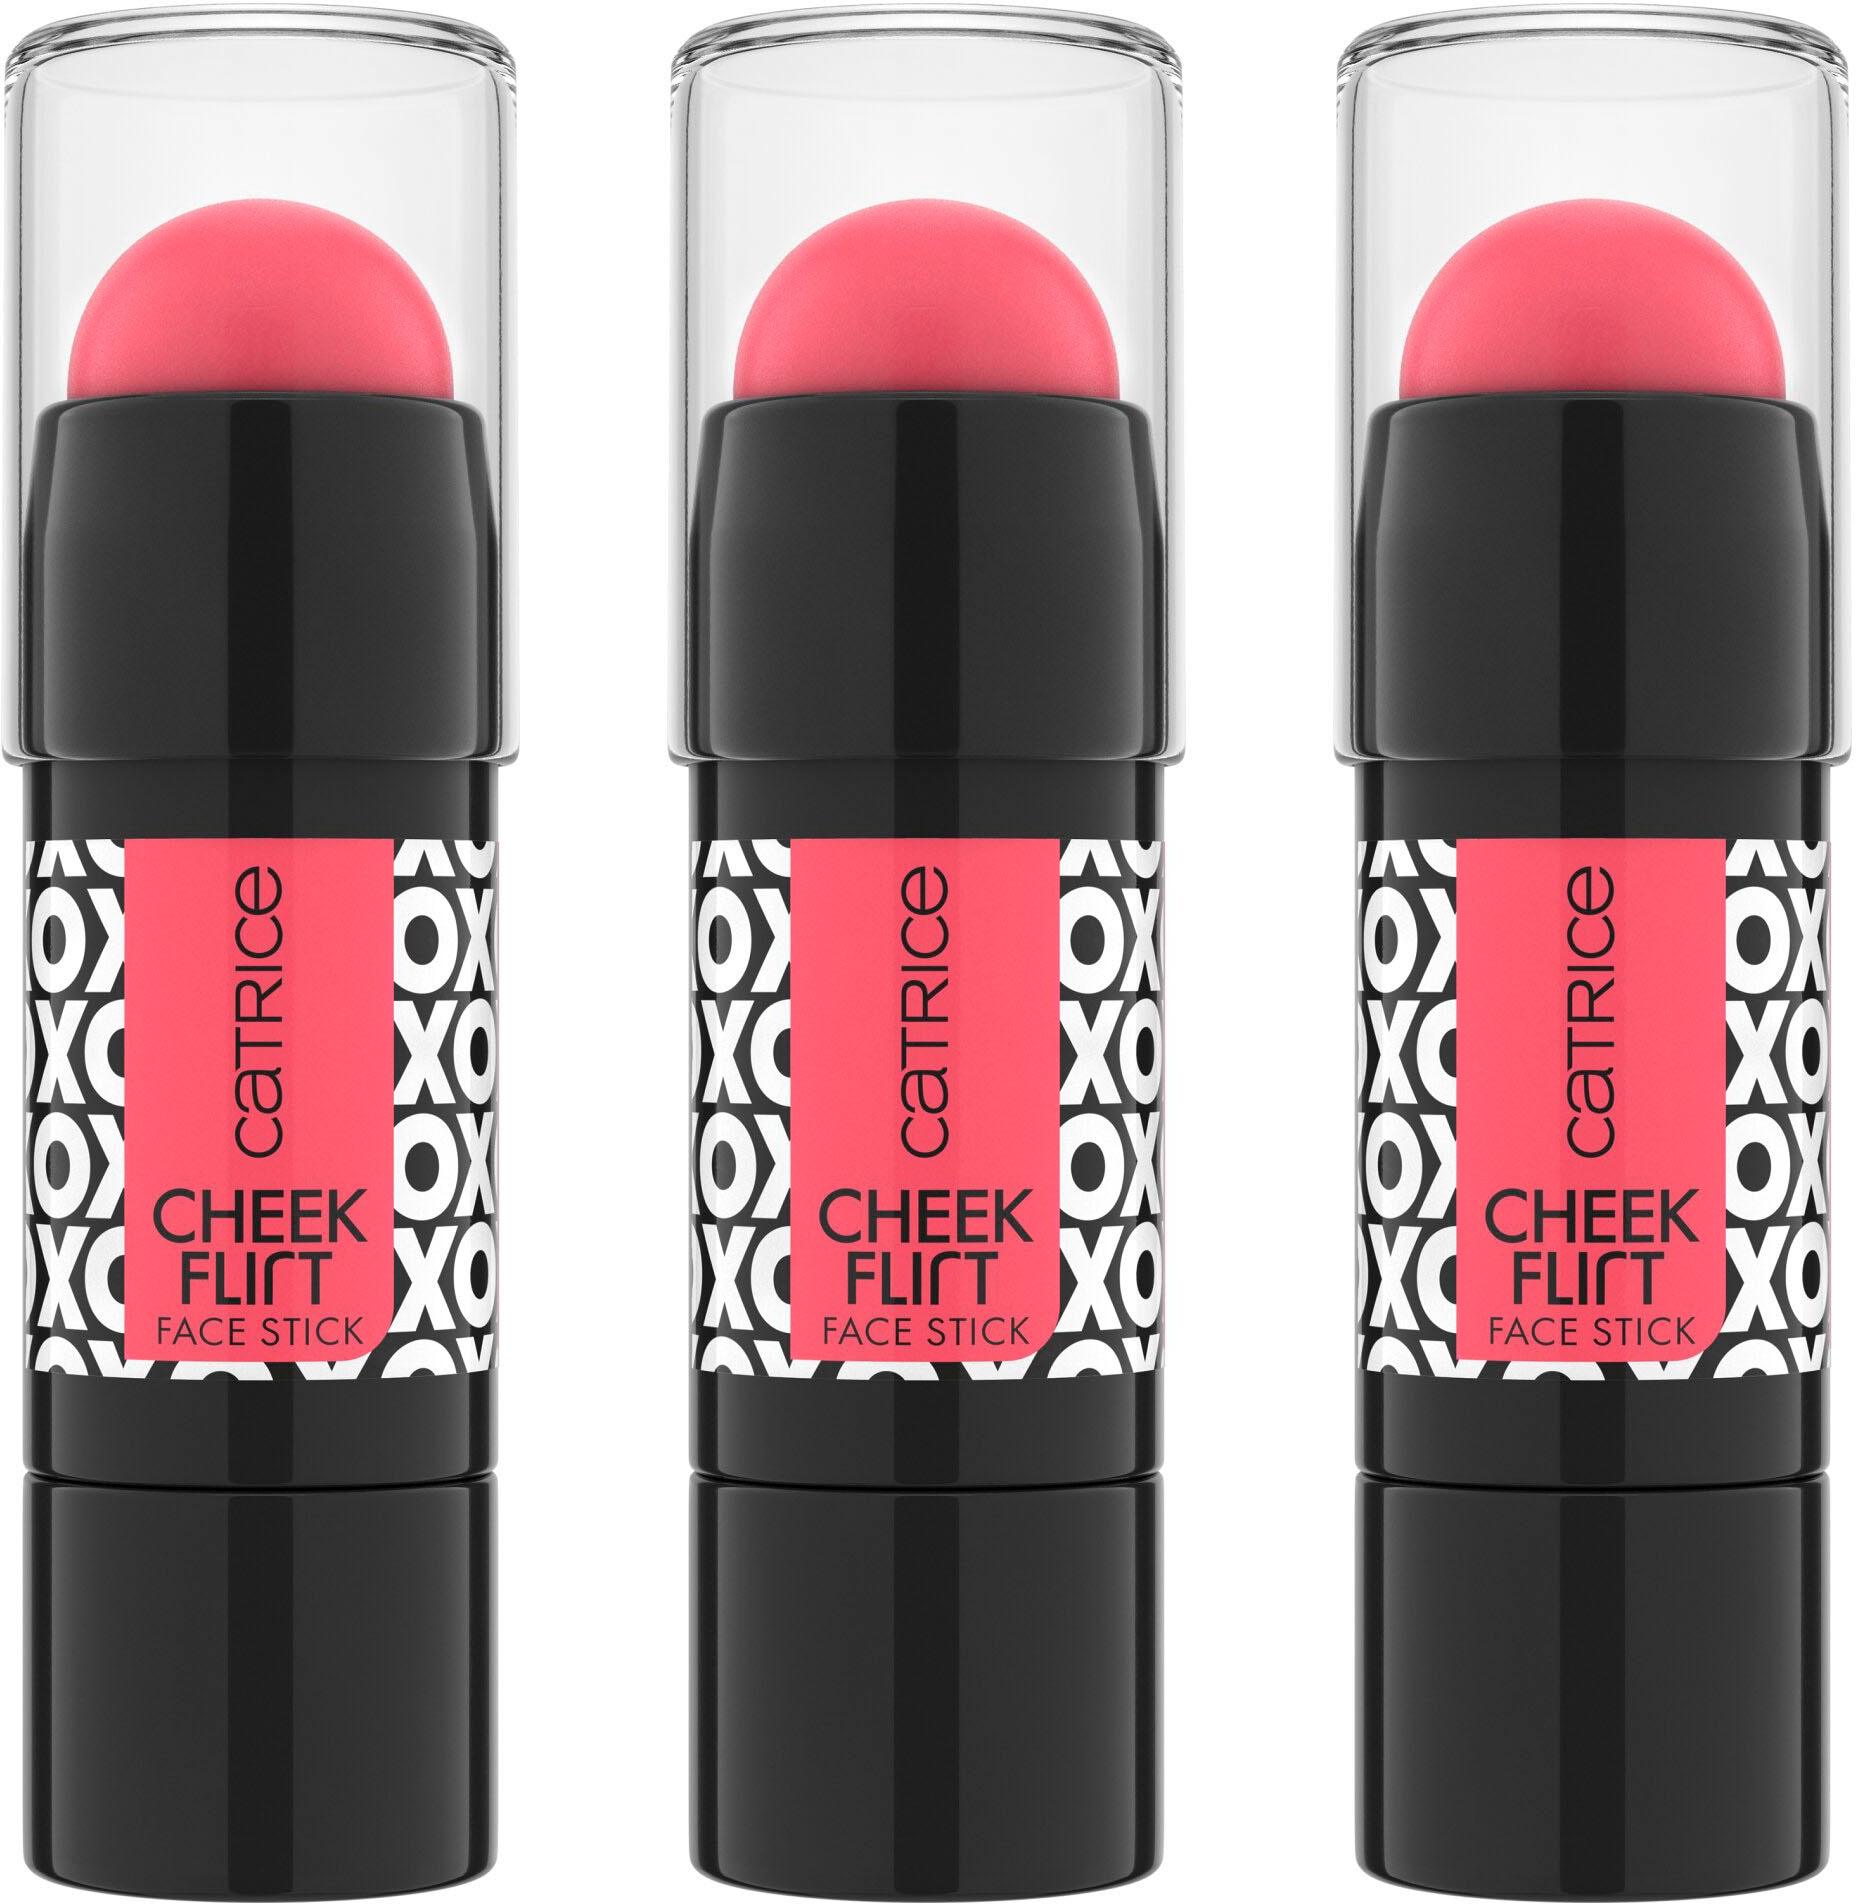 Catrice Rouge »Cheek Flirt Face Stick«, (Packung, 3 tlg.)